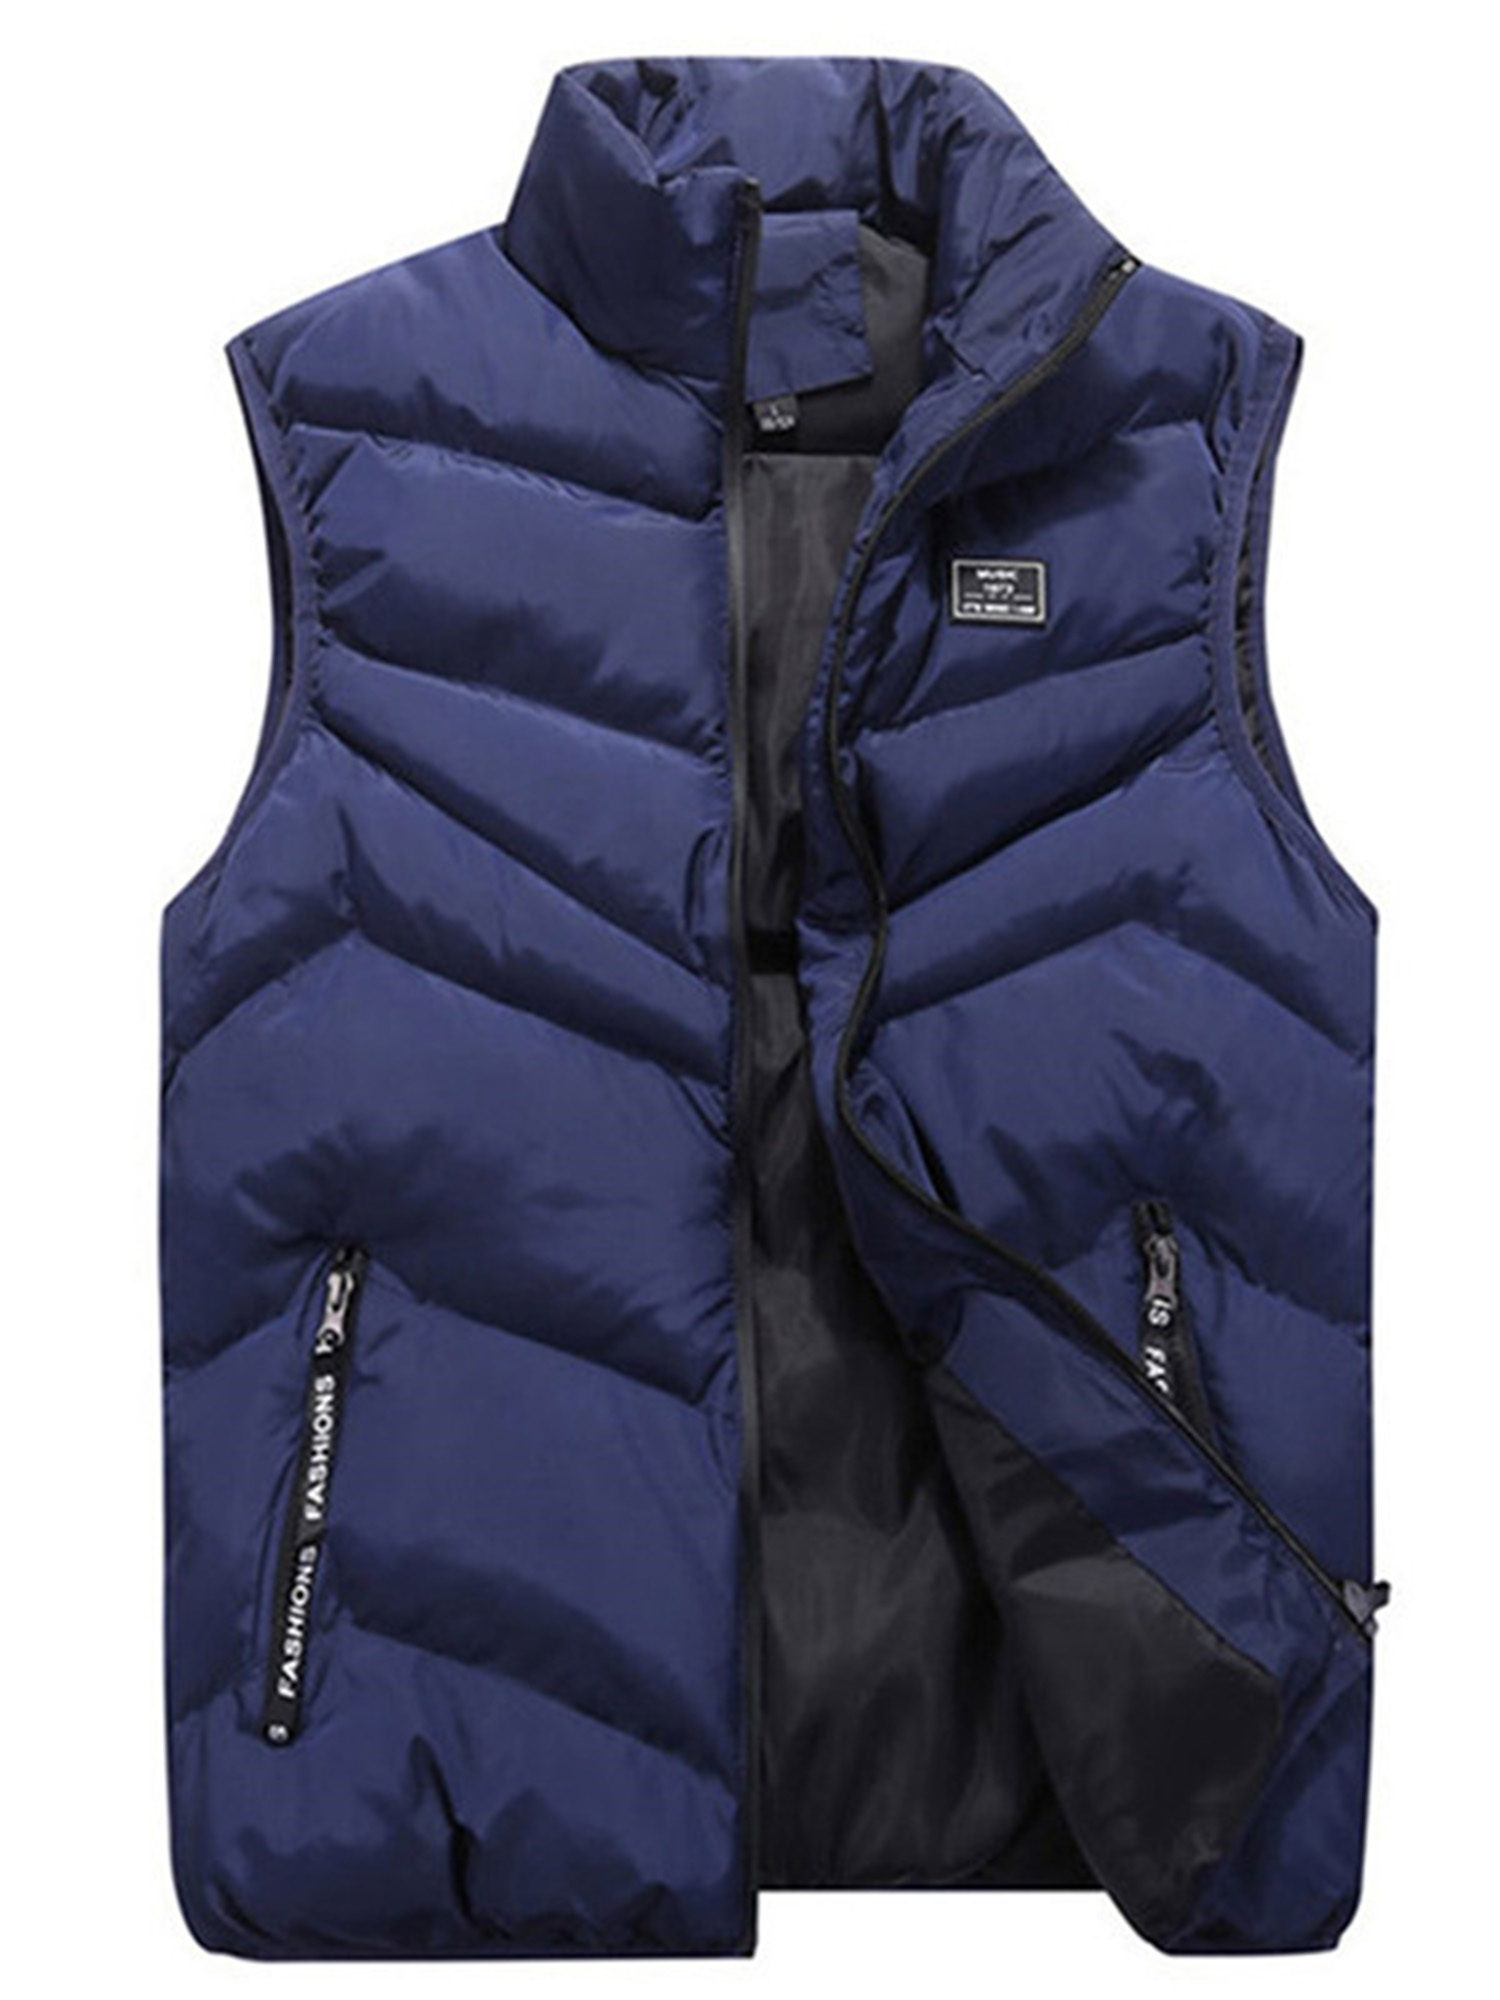 Frontwalk Mens Sleeveless Vest Jackets Winter Casual Stand Collar Zipper Coats Solid Color Padded Puffer Outwear Jacket with Pockets - image 1 of 2